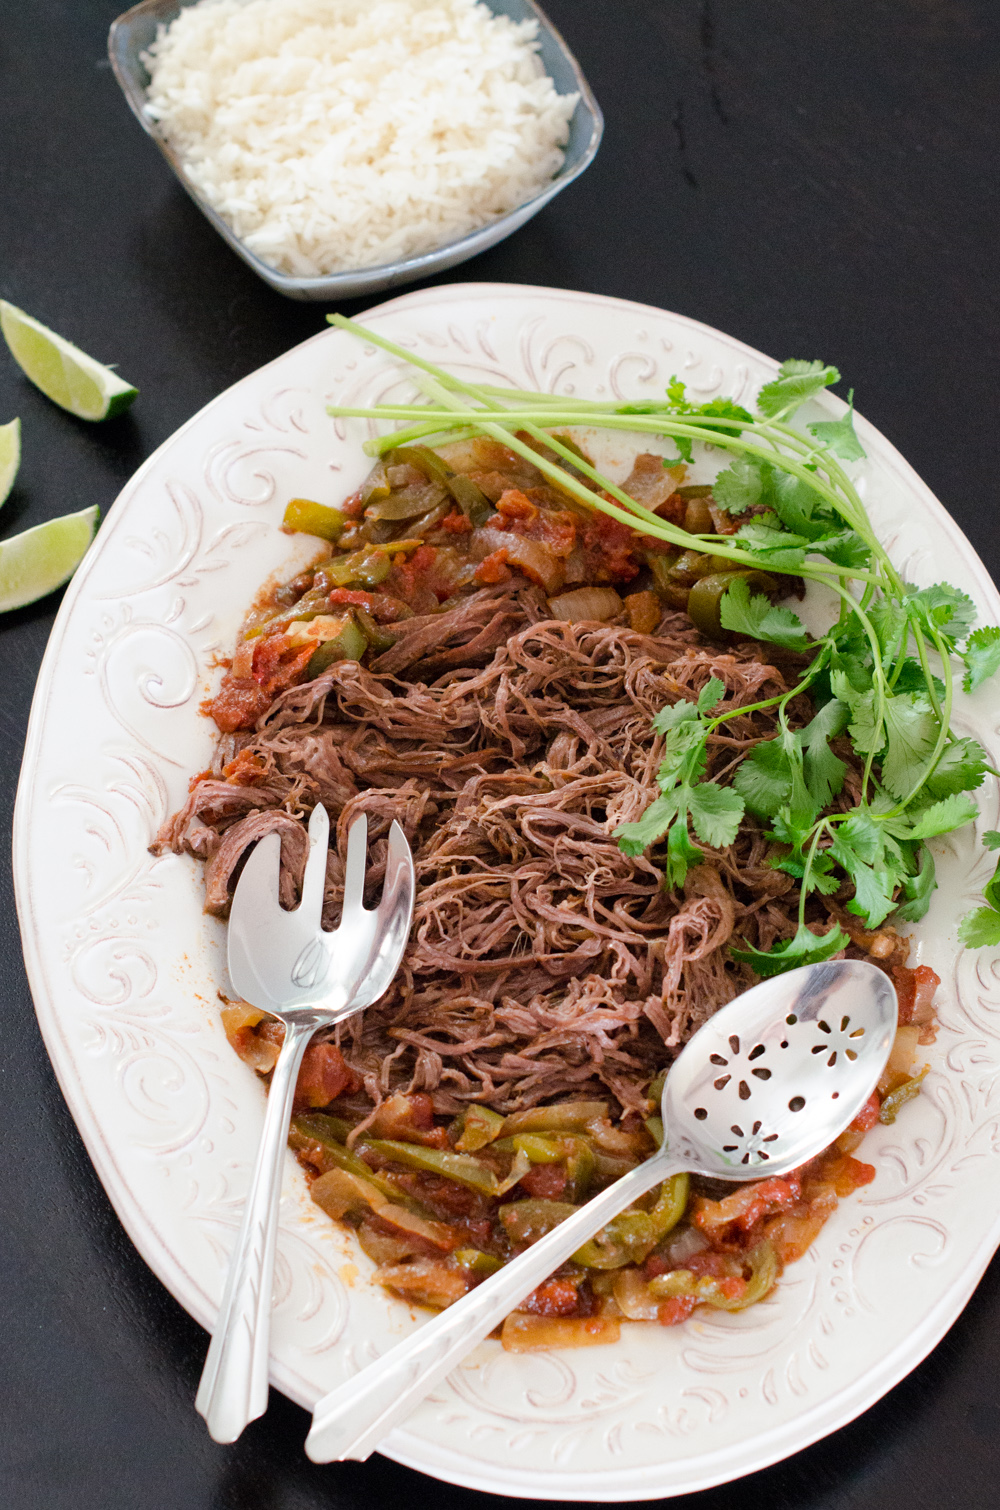 Slow Cooker Ropa Vieja recipe from ChefSarahElizabeth.com